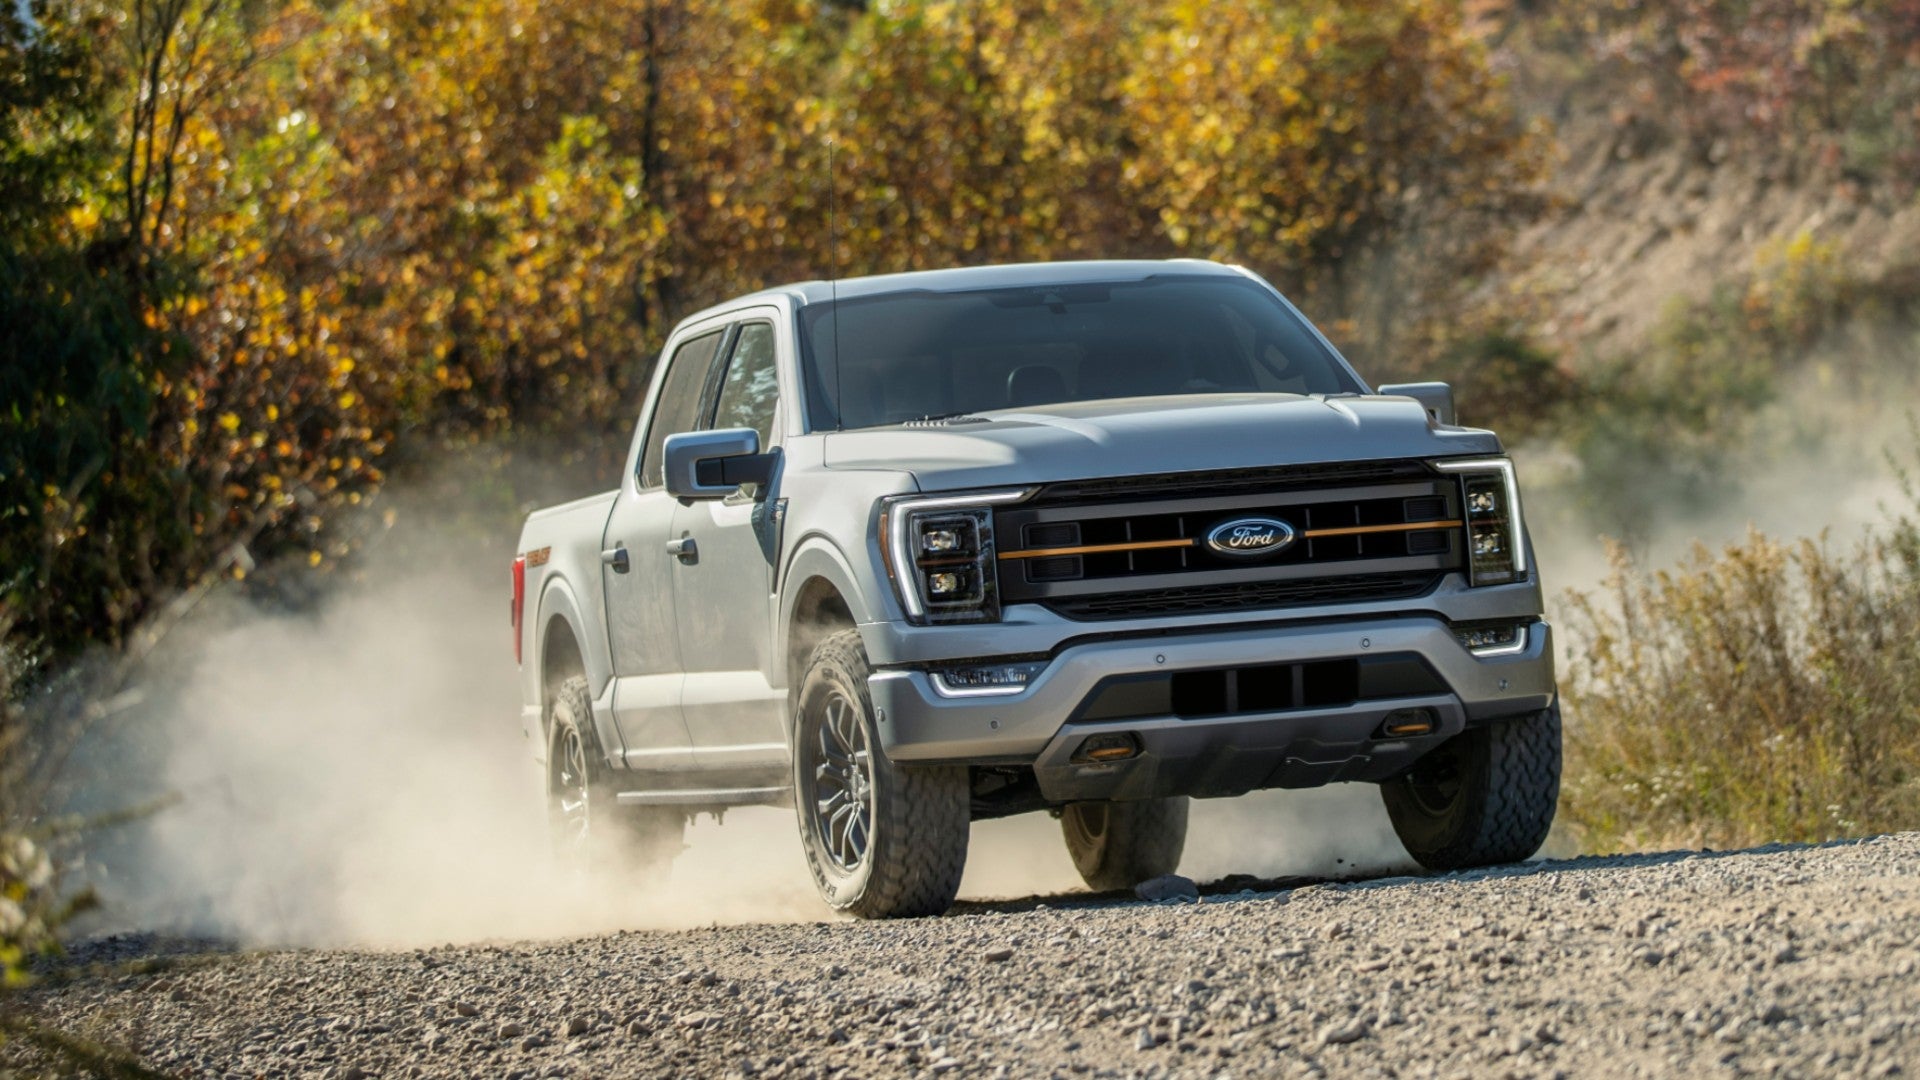 Ford Won’t Sell You a V8 F-150 Tremor